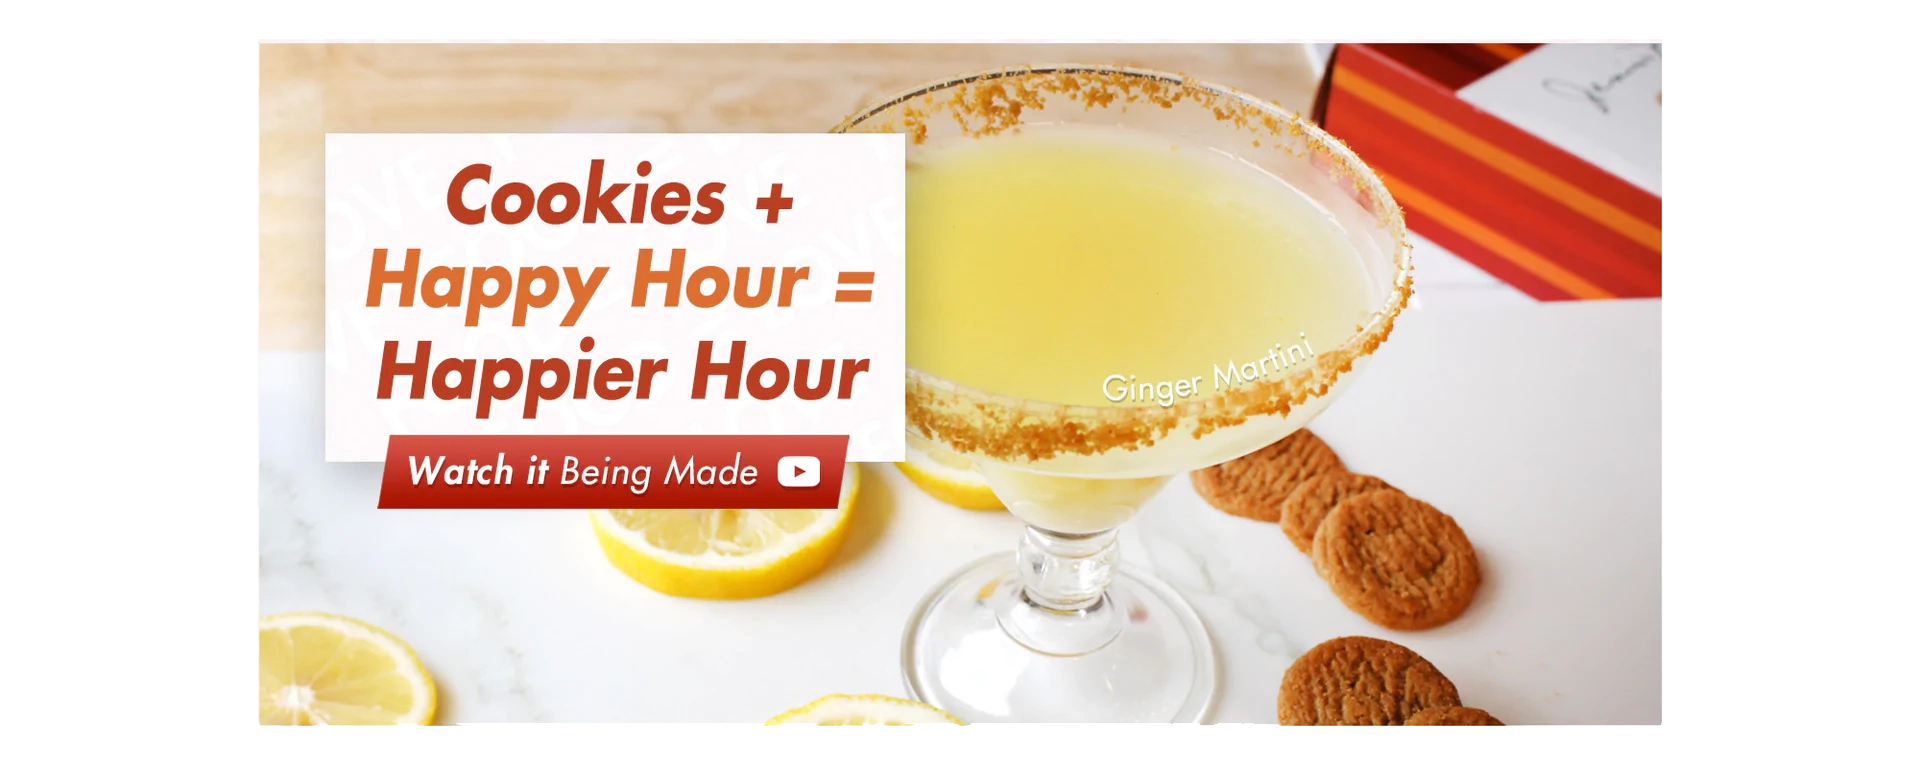 Ginger Martini in a cocktail glass with our Organic Ginger Thins crushed on the rim. Click for a video detailing how to make this drink. Delicious cookies plus happy hour equals a much happier hour with Janis & Melanie's Soon-to-Be Famous Ginger Martini.